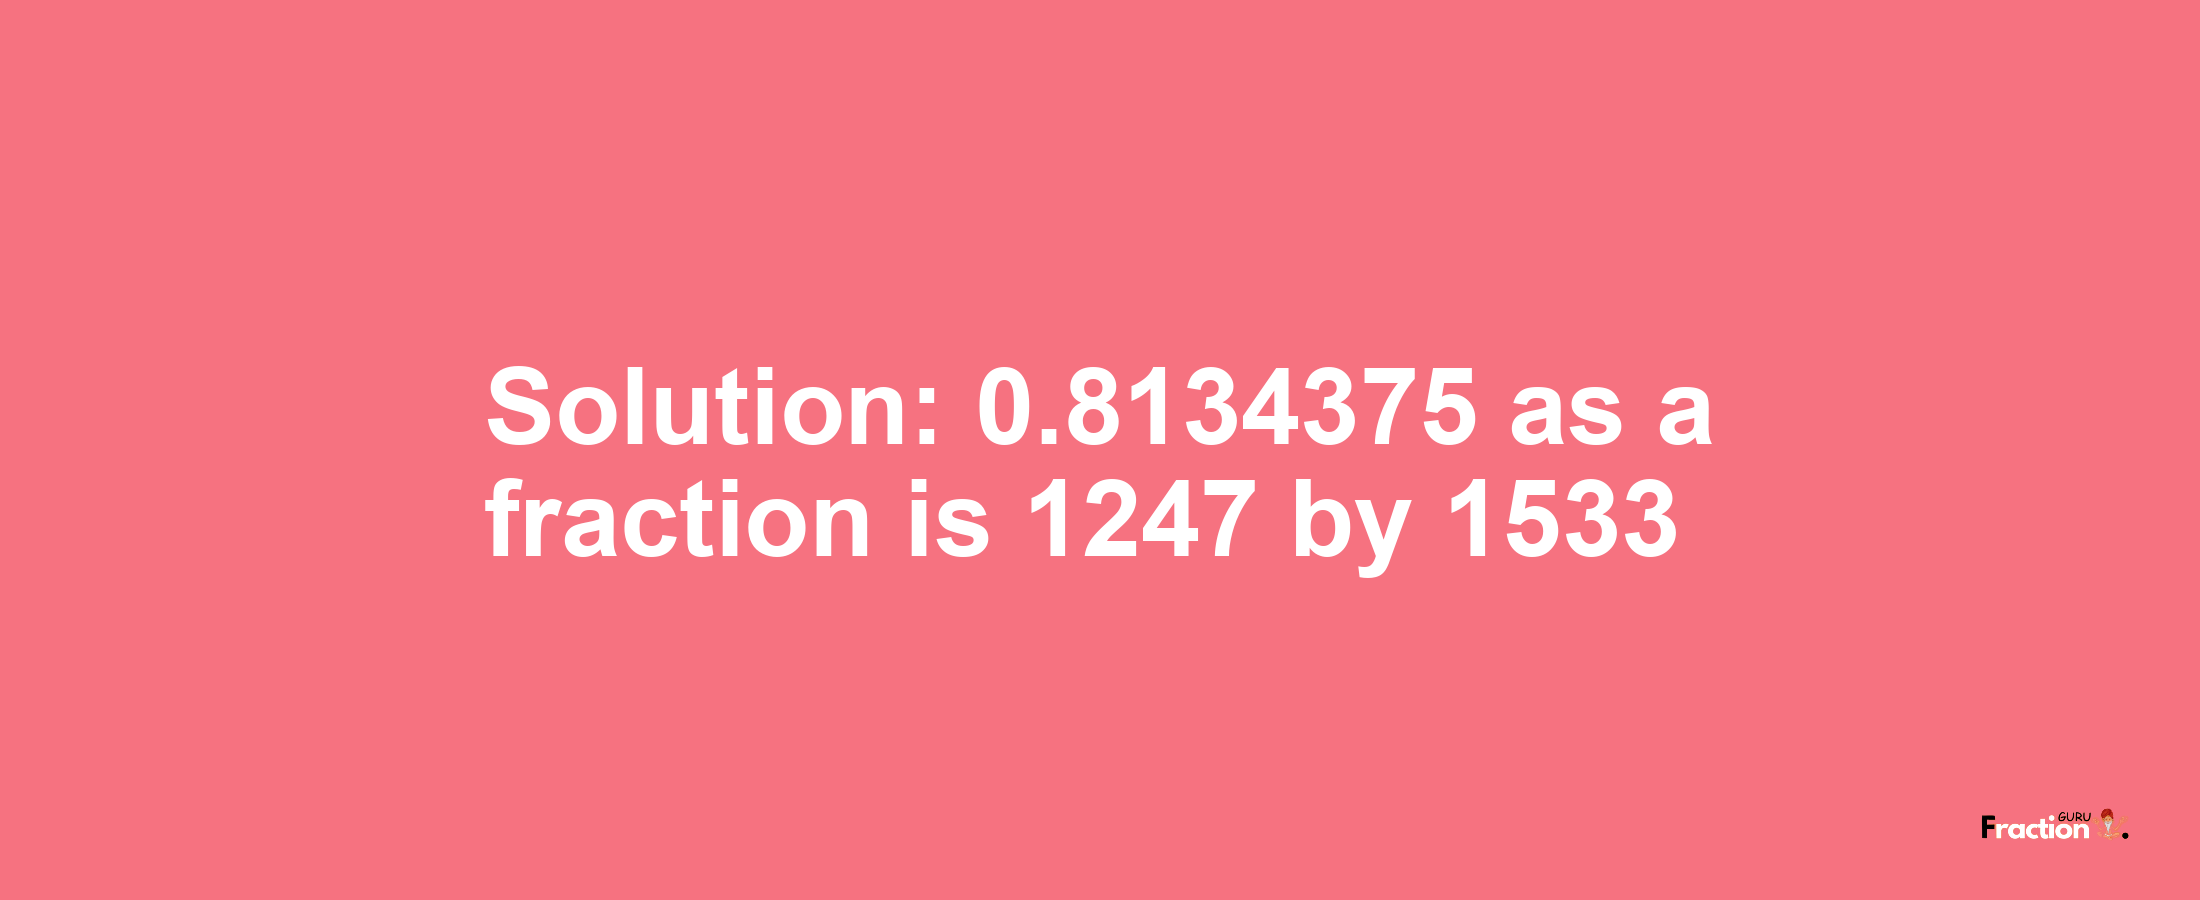 Solution:0.8134375 as a fraction is 1247/1533